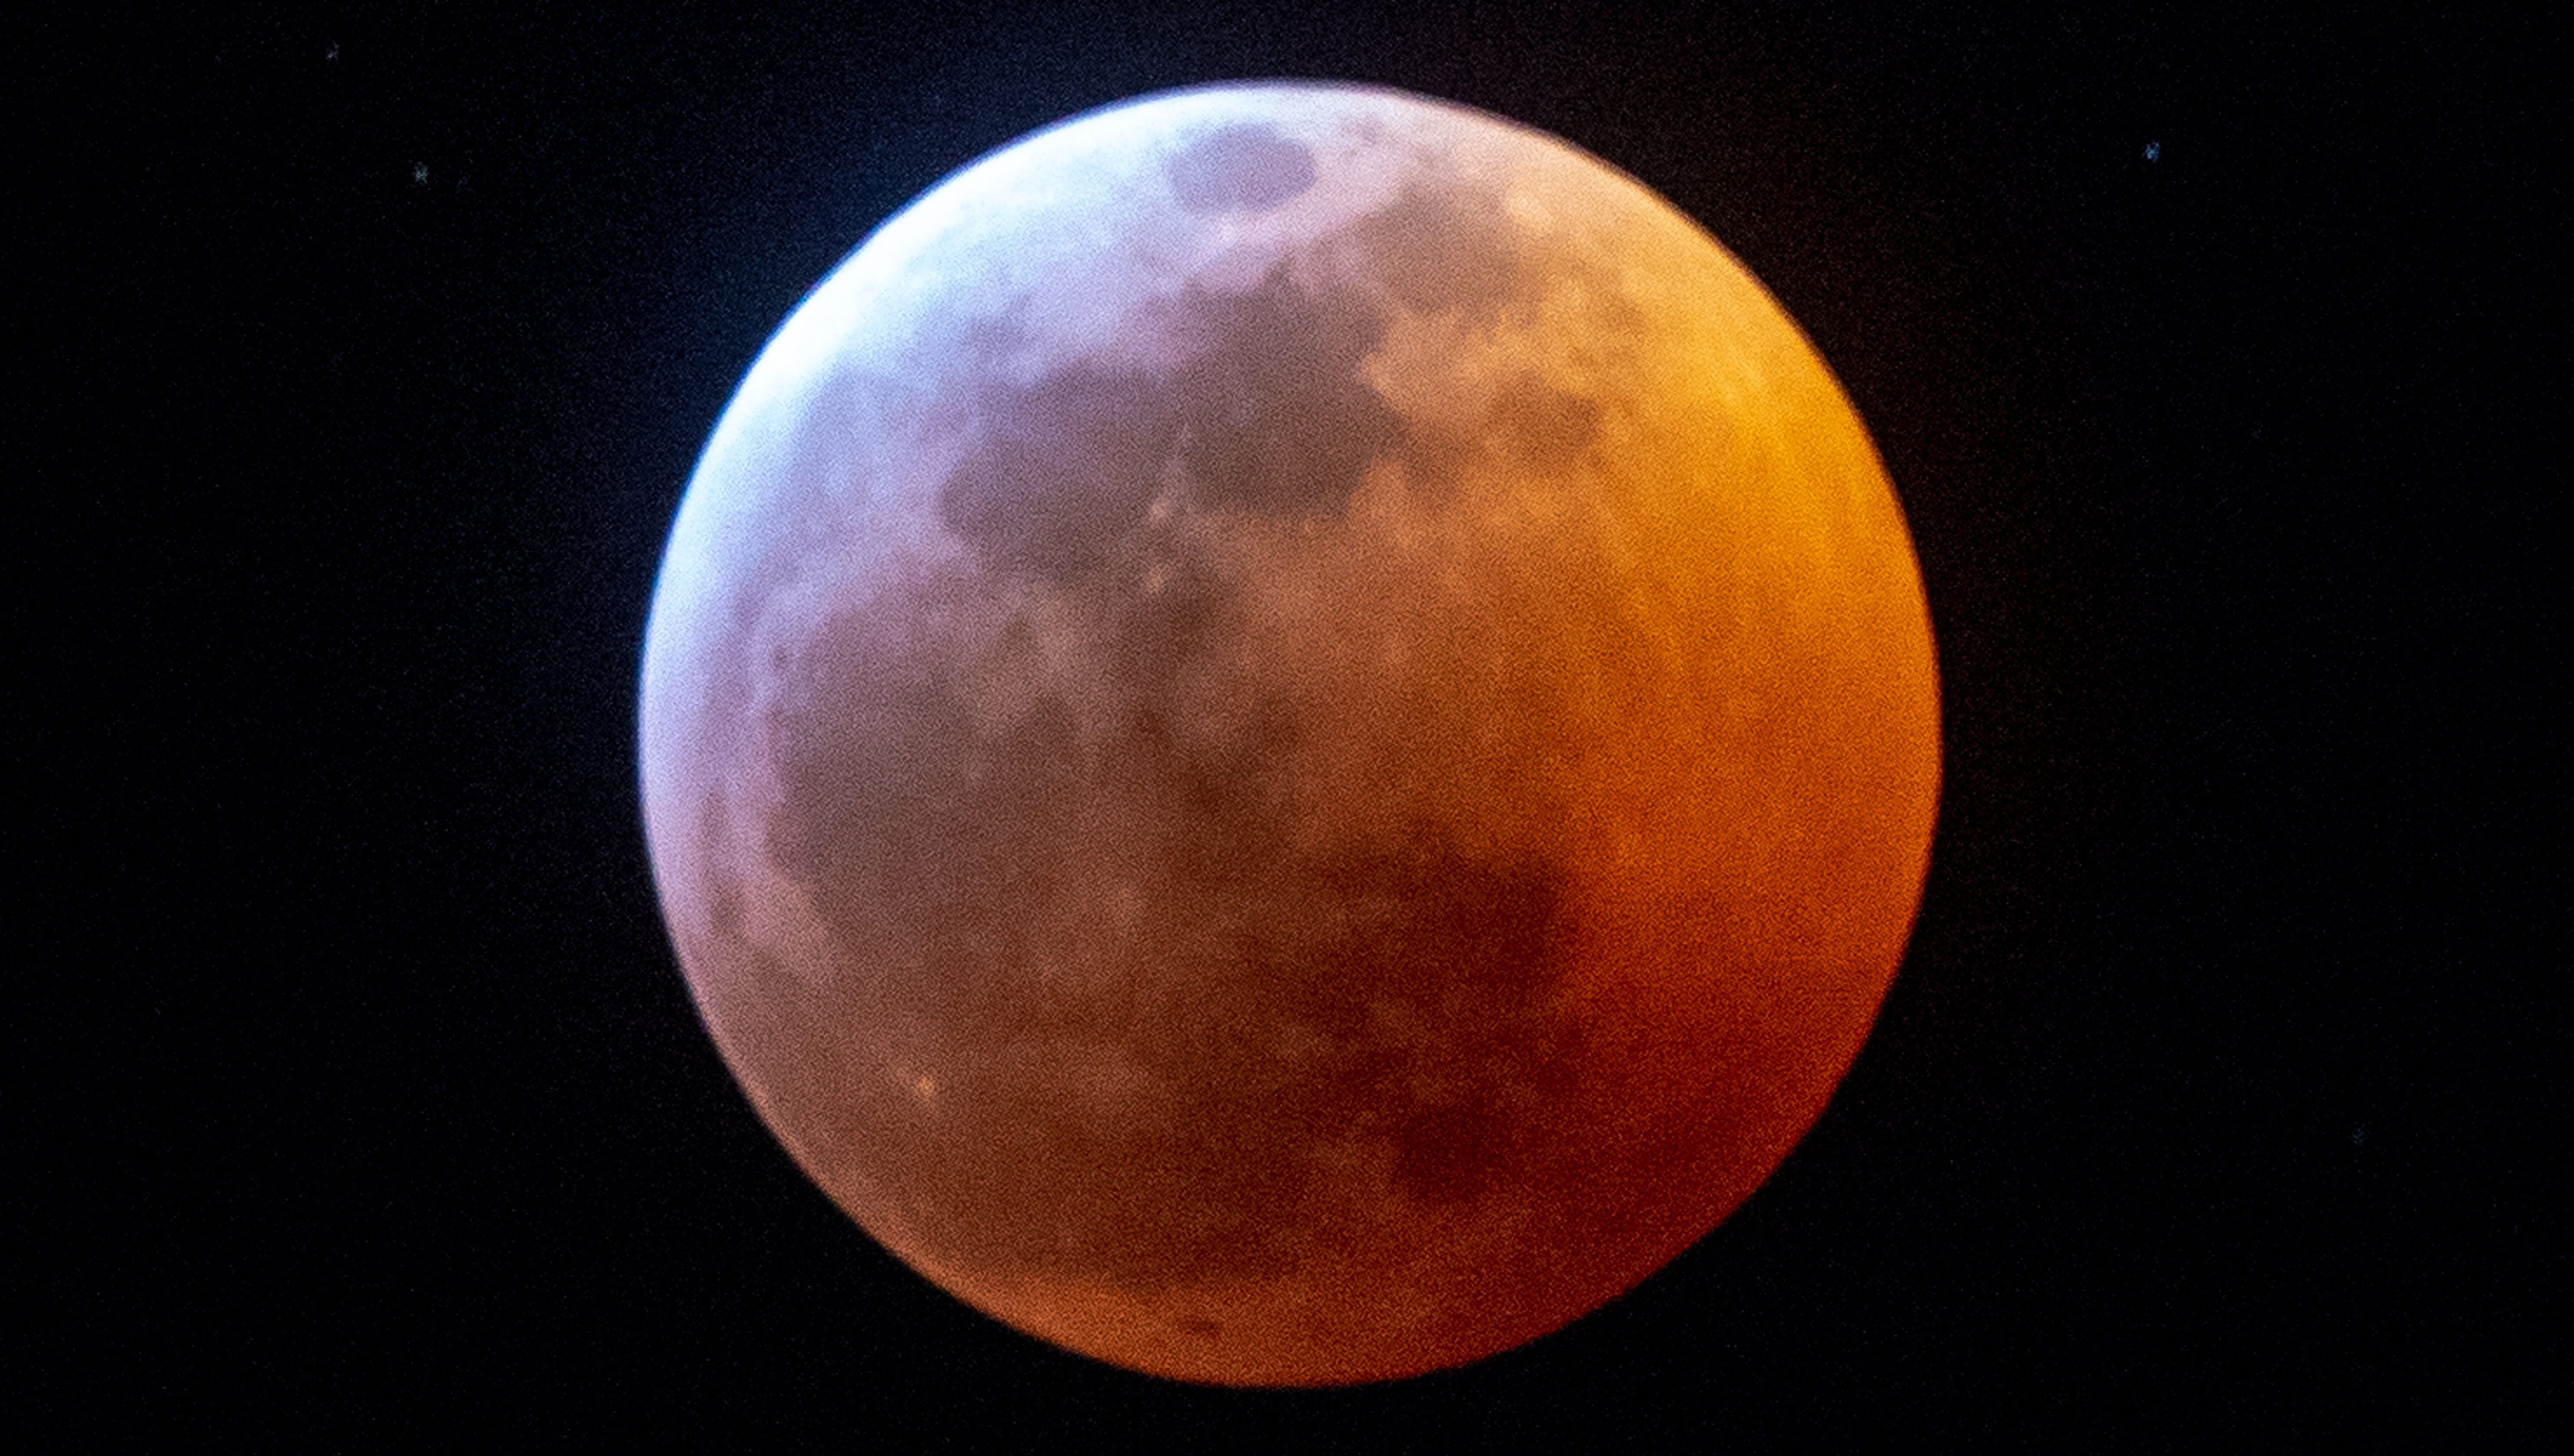 When Is the Next ‘Blood Moon’ Total Lunar Eclipse?